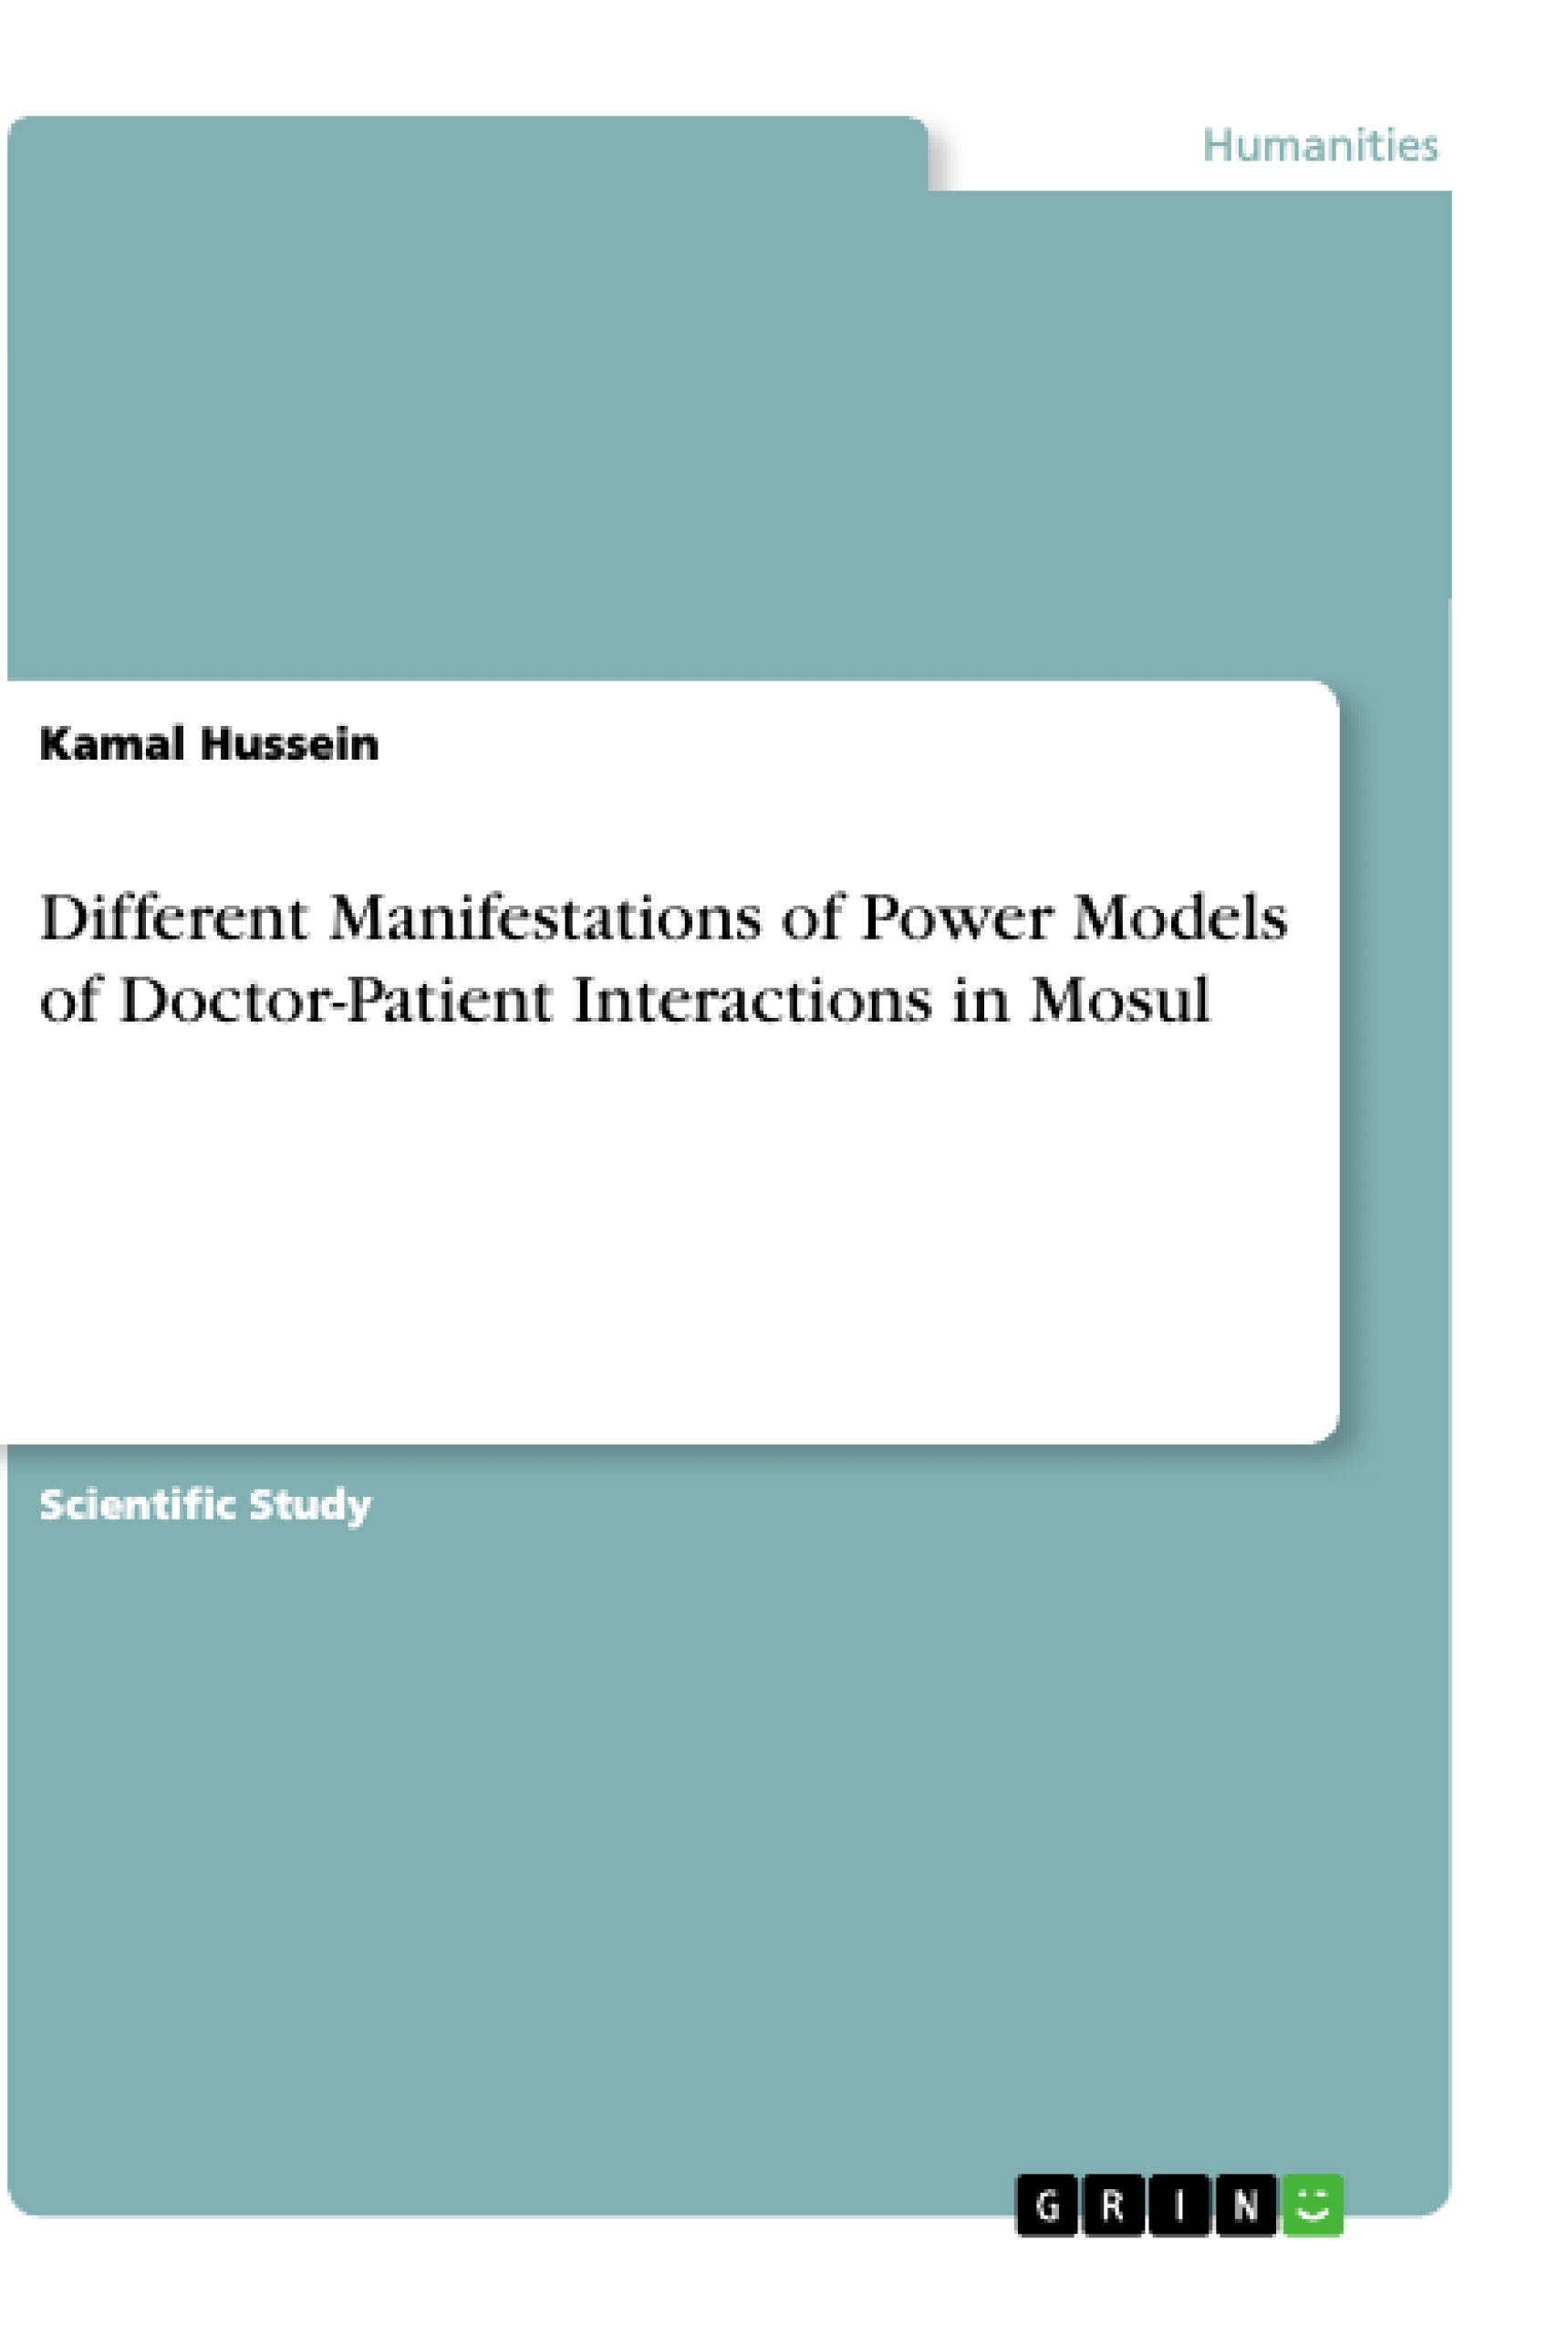 Título: Different Manifestations of Power Models of Doctor-Patient Interactions in Mosul